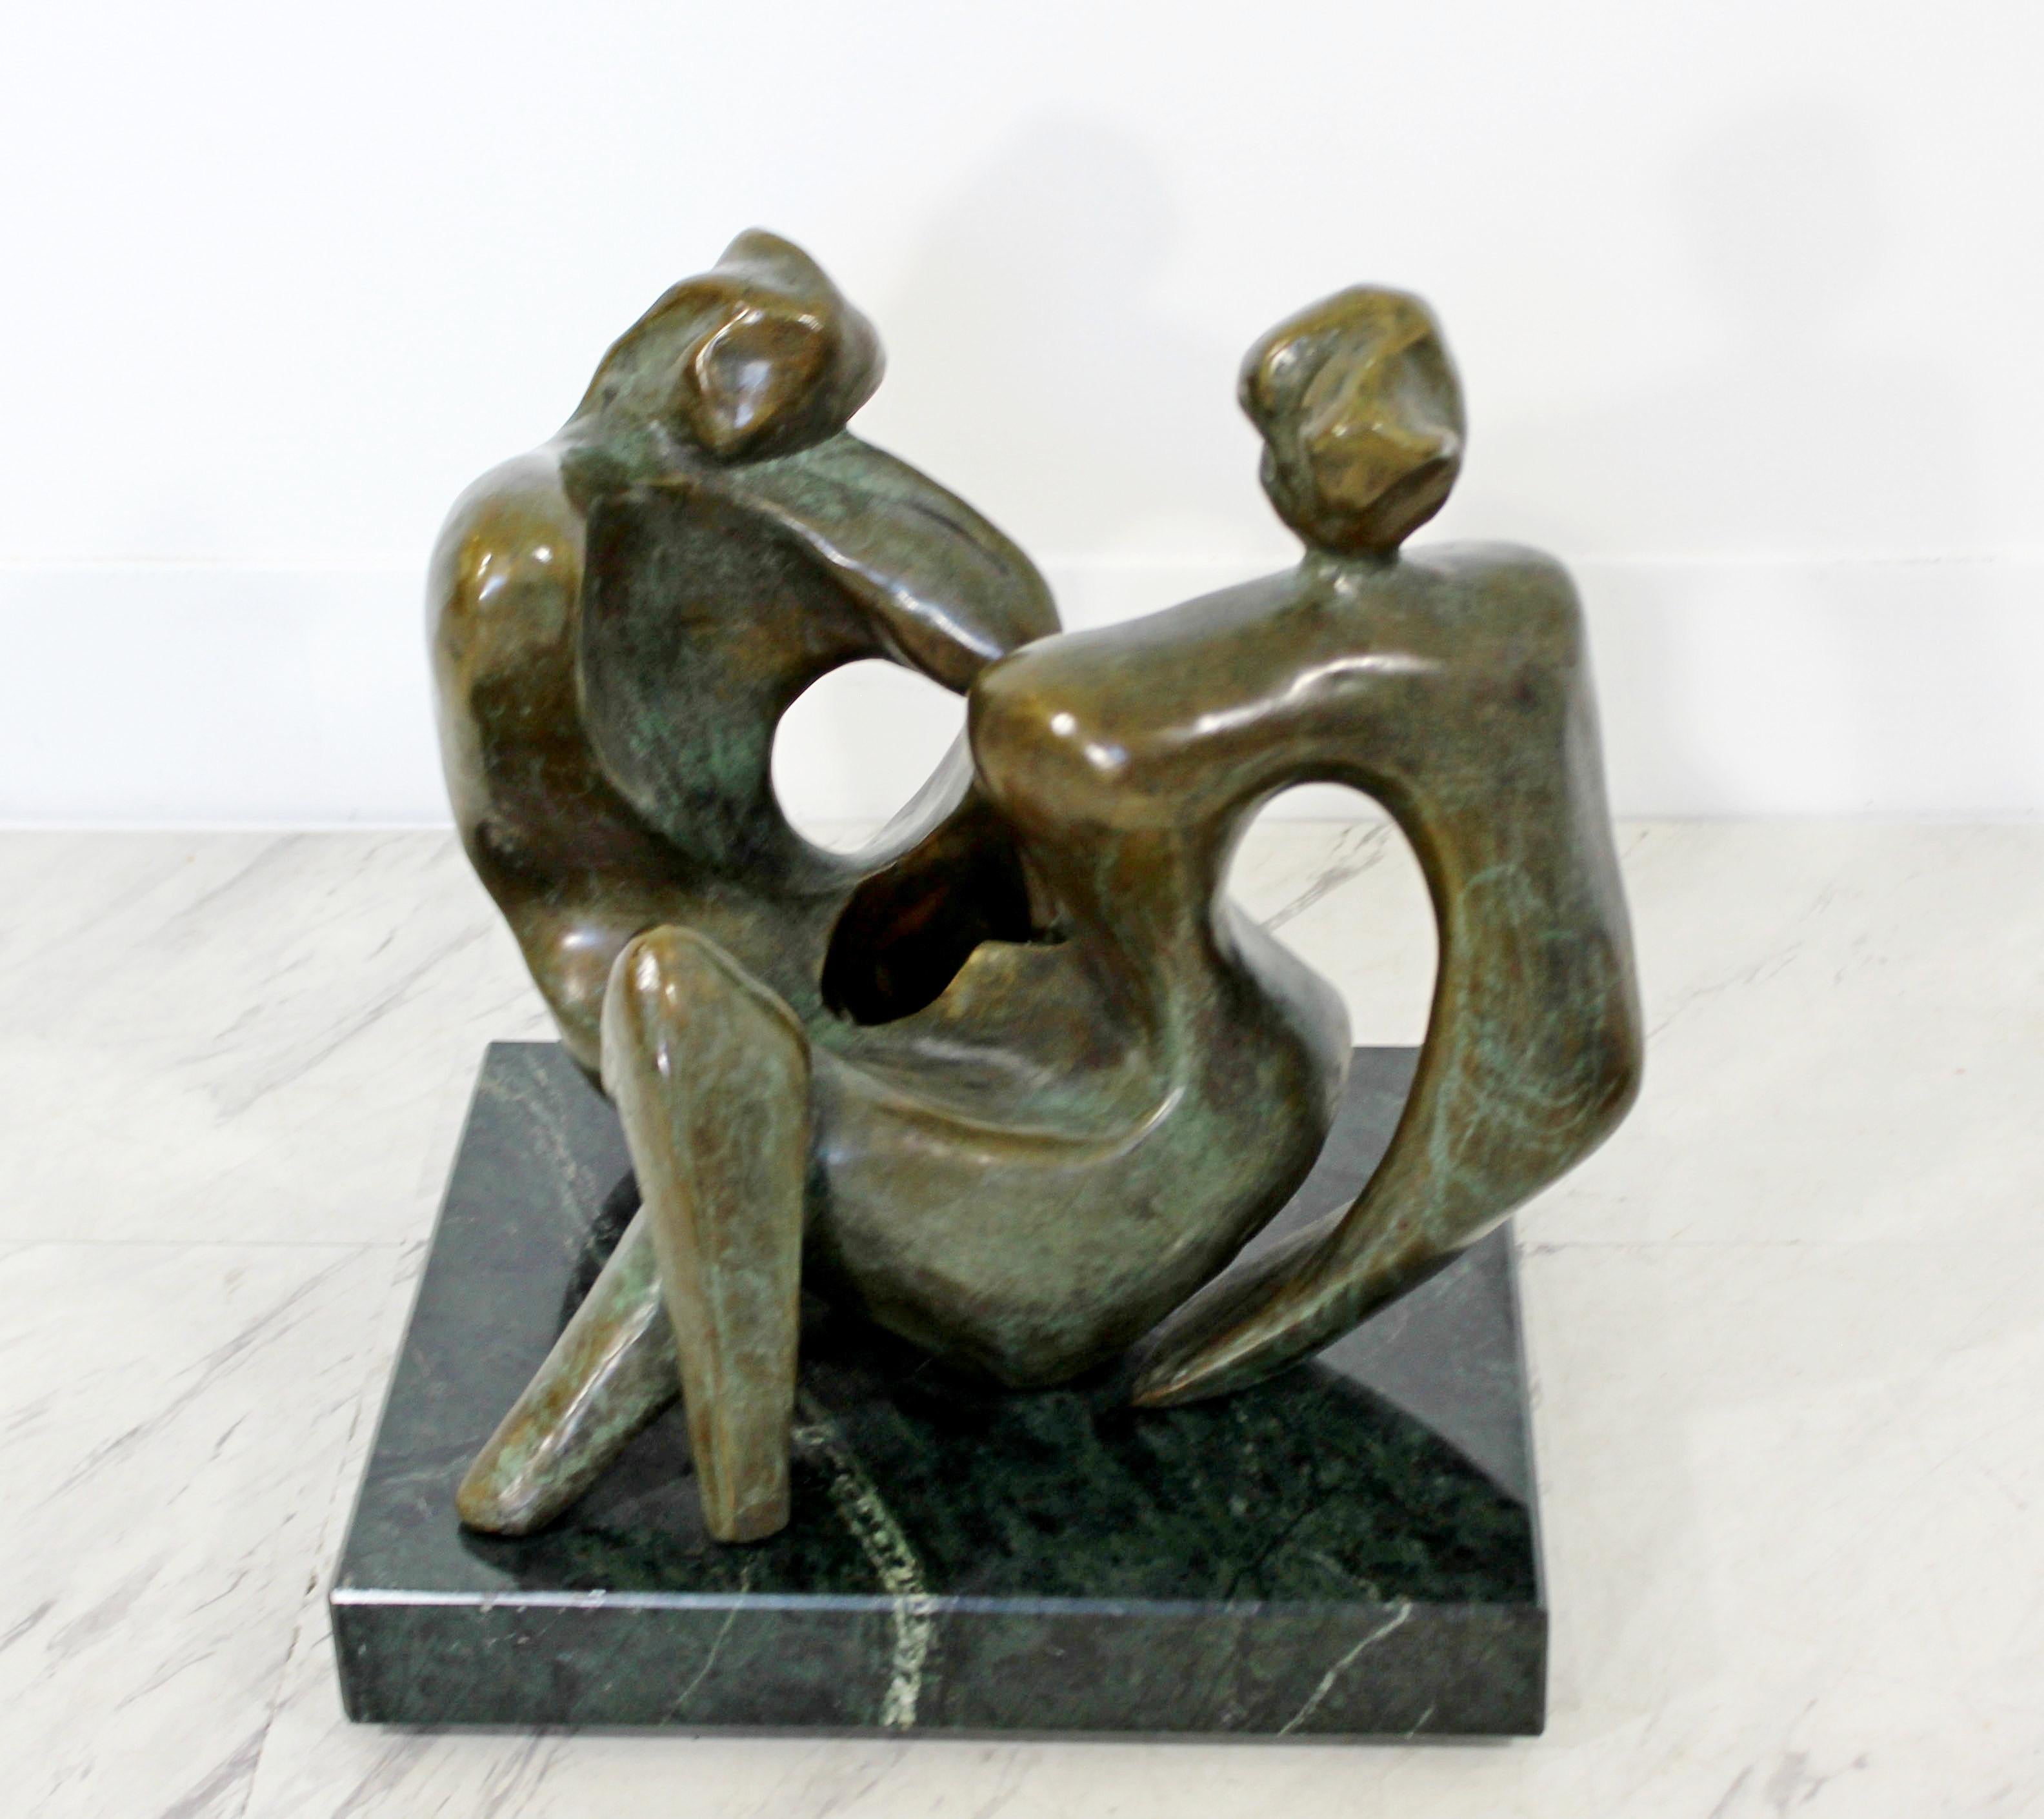 For your consideration is a magnificent, bronze table sculpture of two reclining women, on a green marble base, by Jean Jacques Porret, titled 